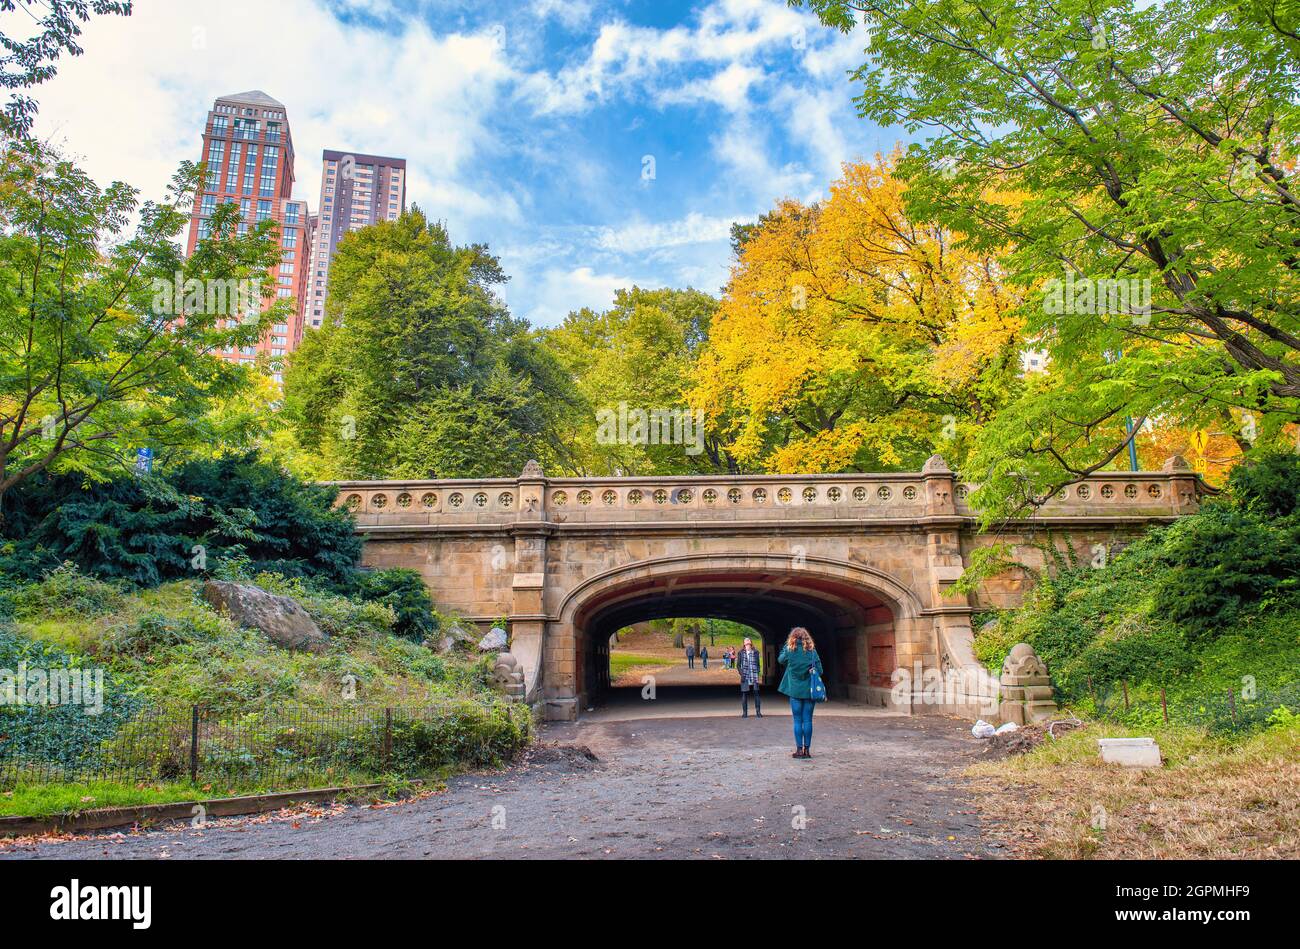 NEW YORK CITY, USA - OCTOBER 25TH, 2015: Tourists and locals visit Central Park in autumn season. It is a main city attraction Stock Photo